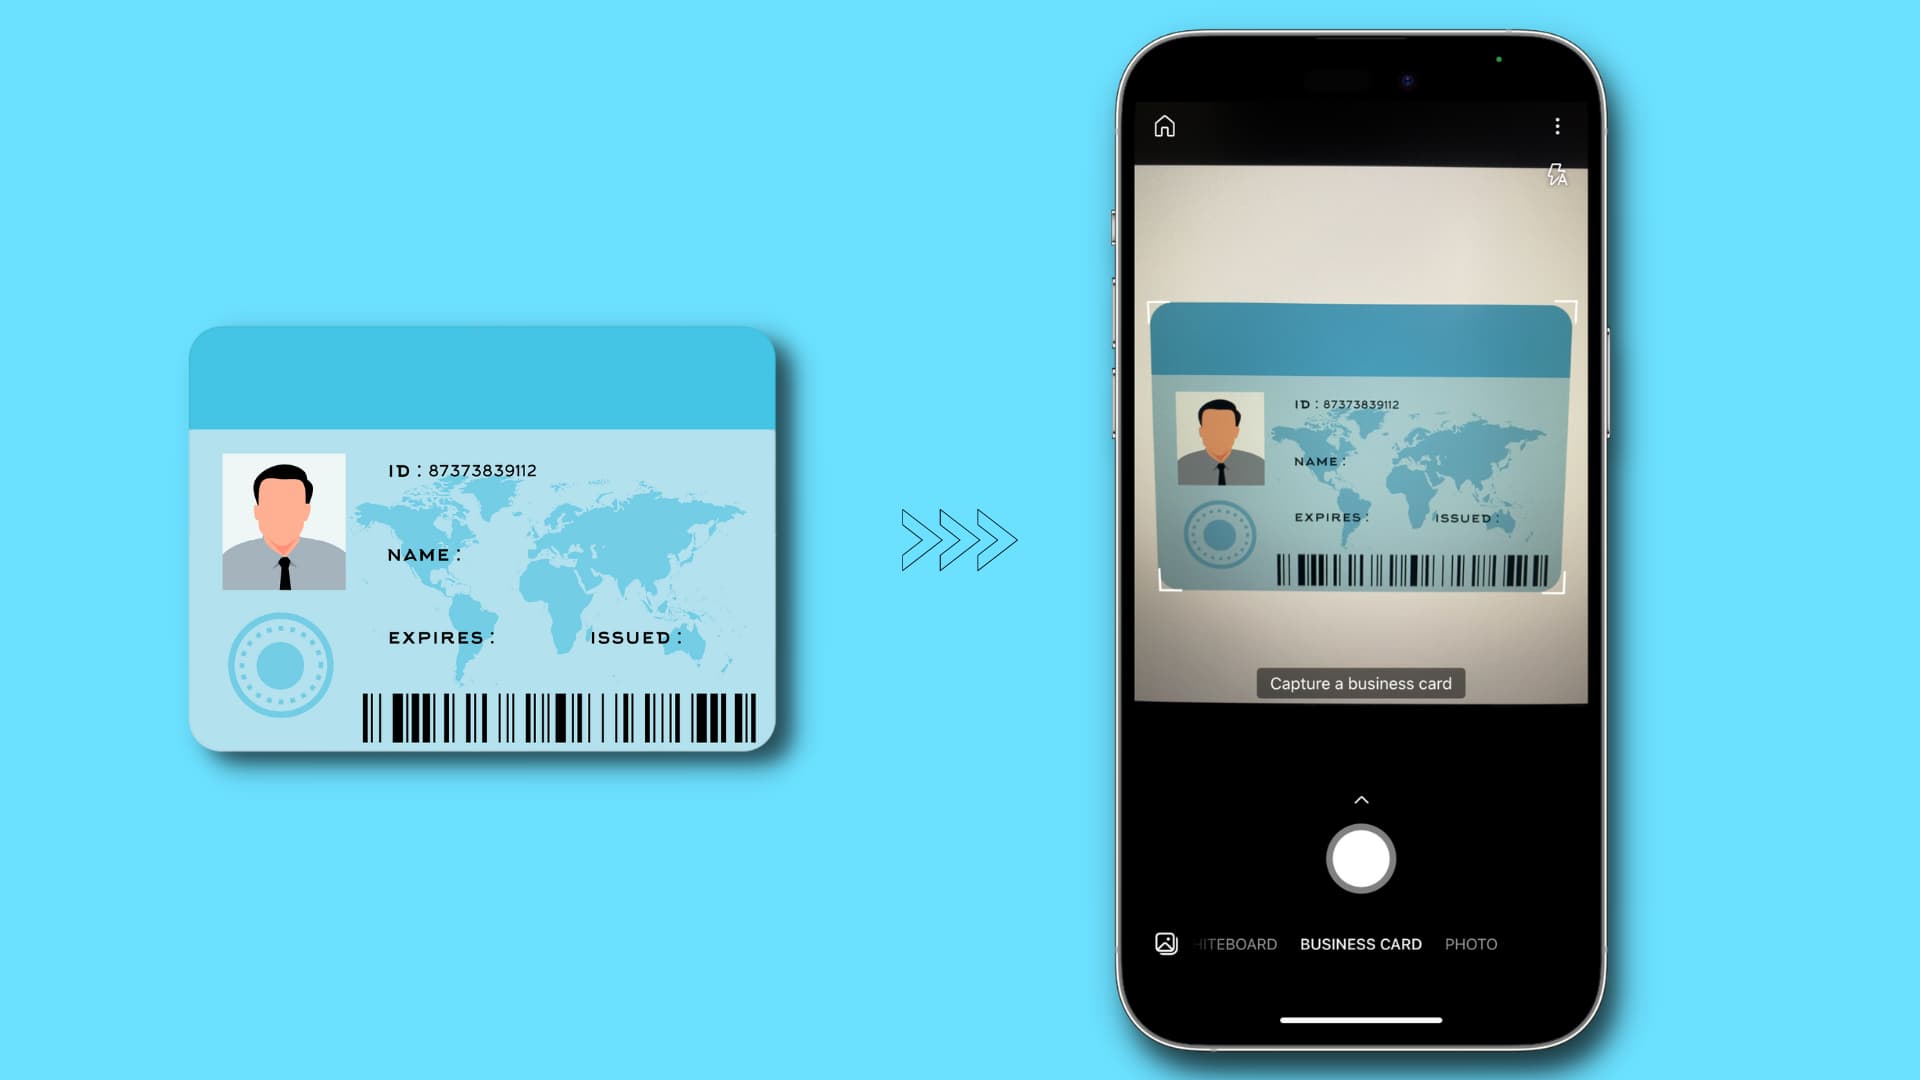 Scanning a ID card using iPhone